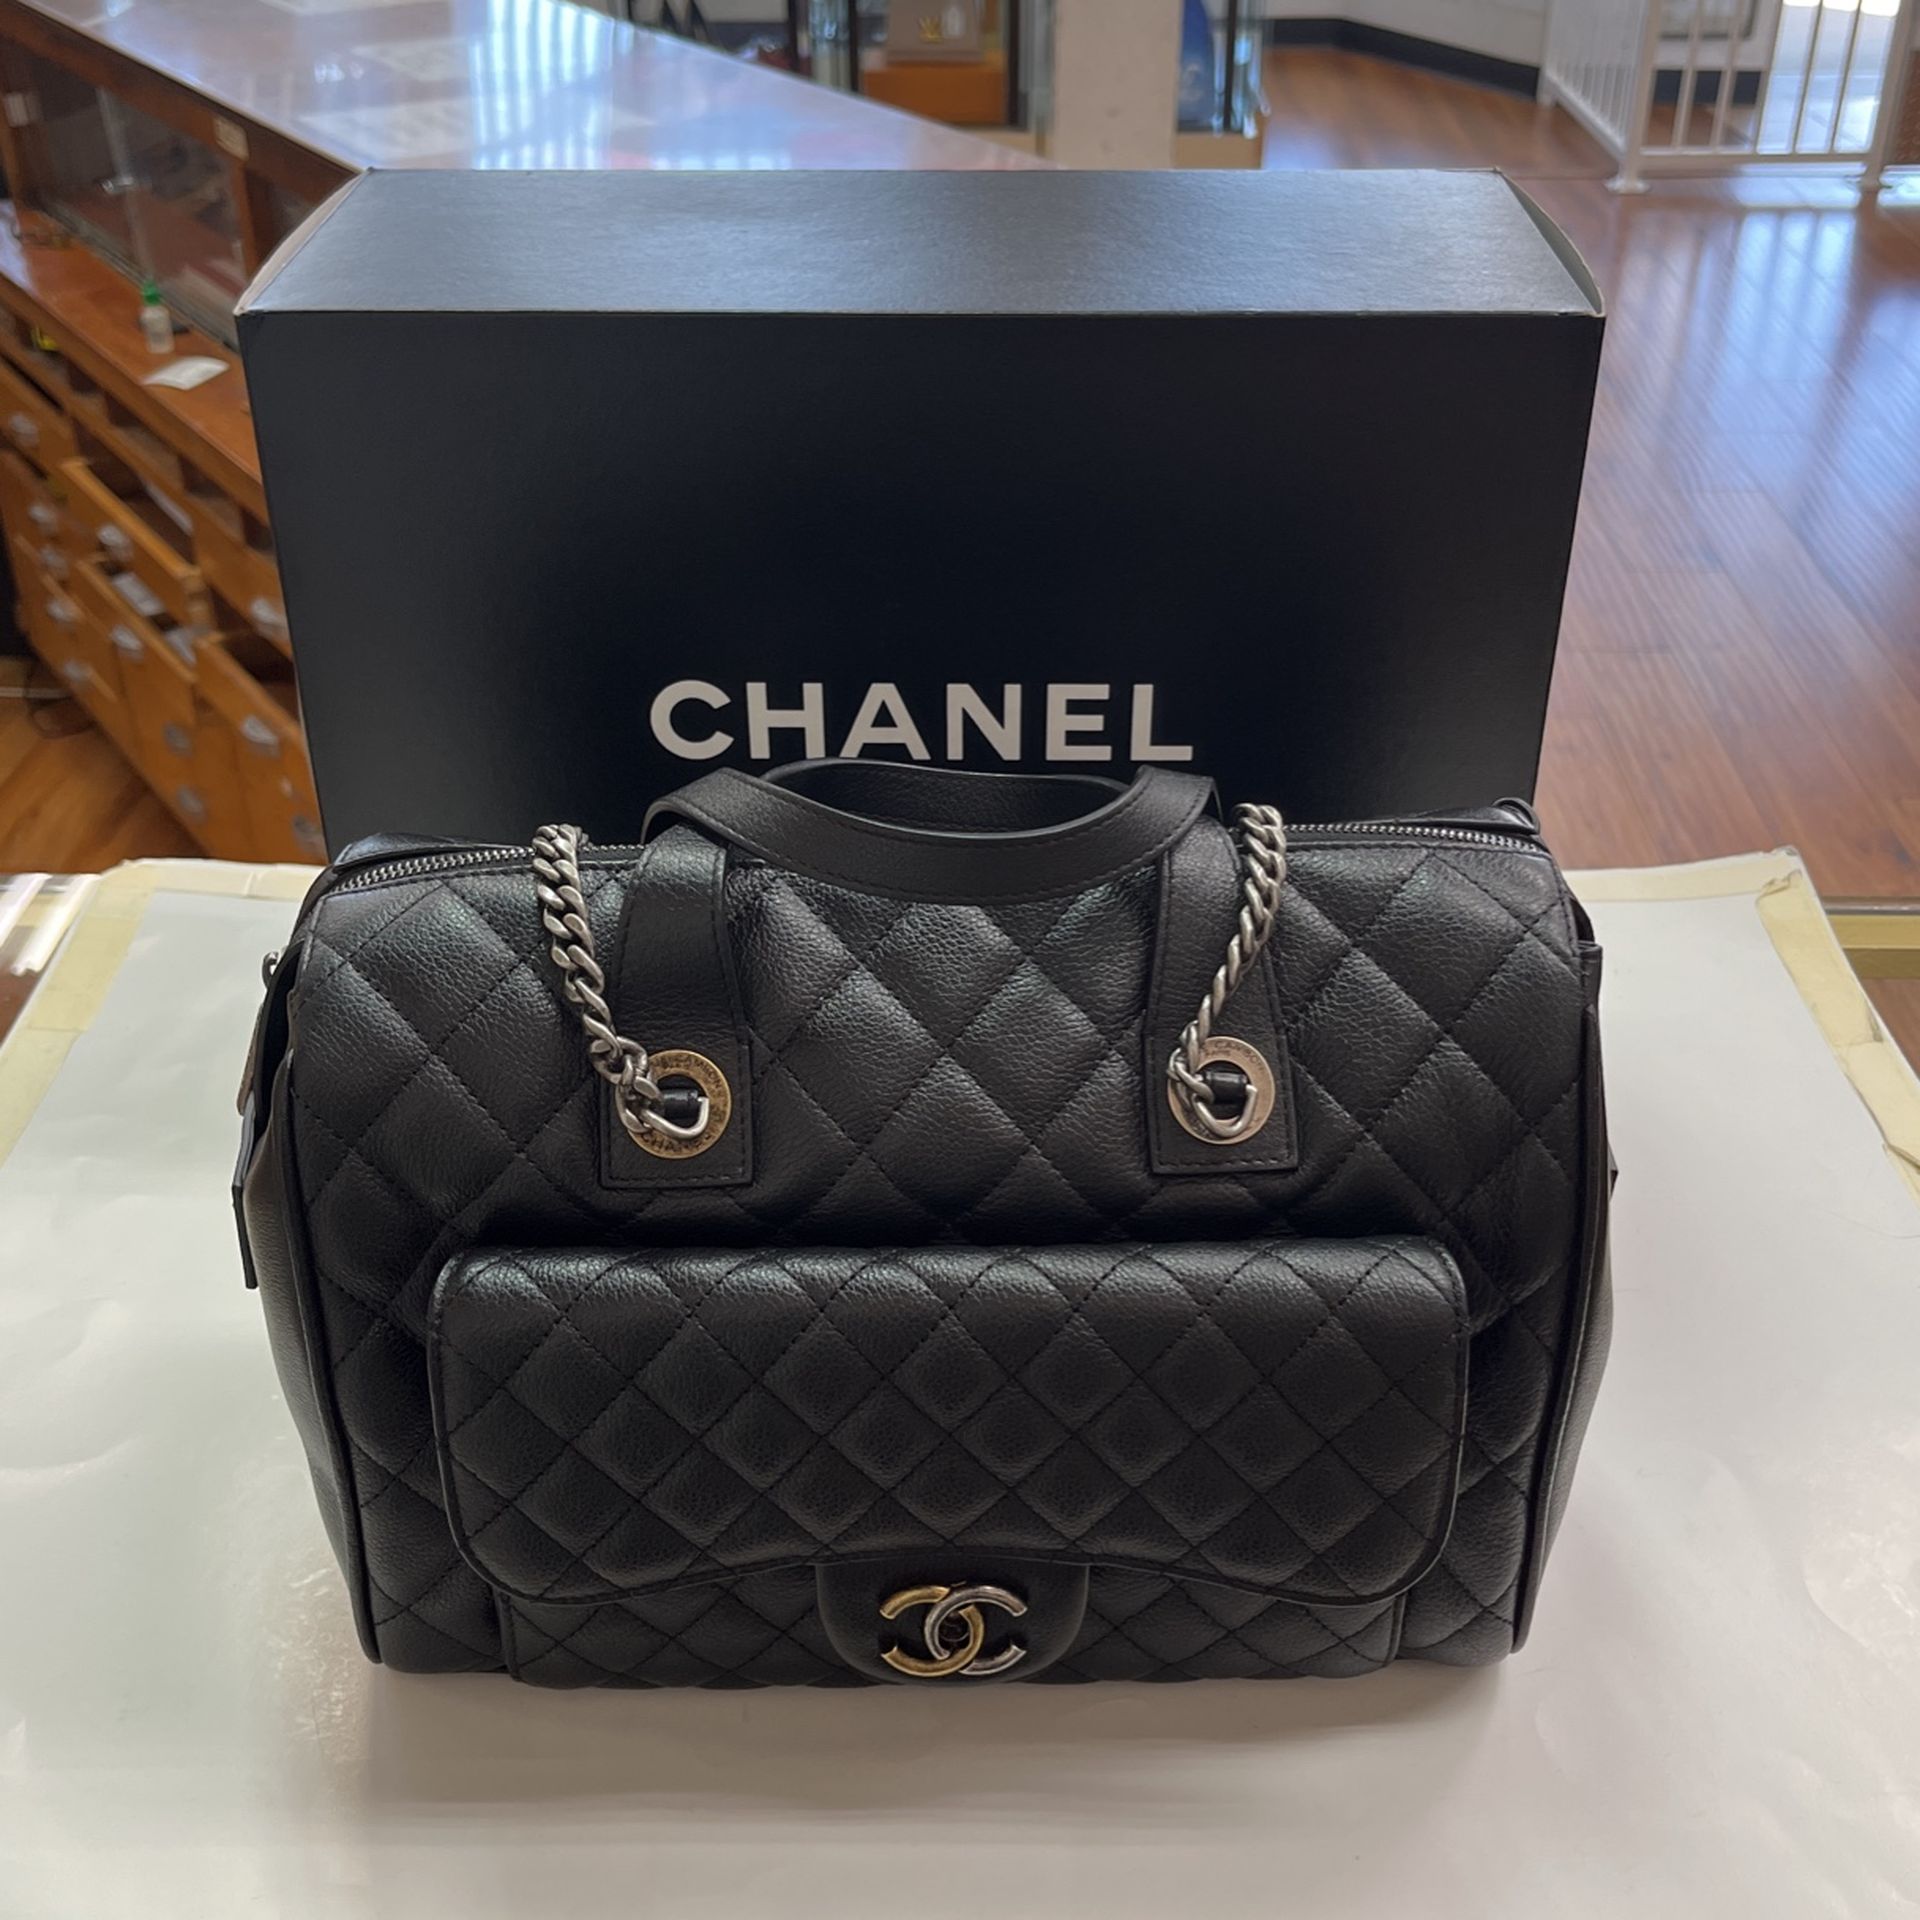 Chanel Bowling Bag, With Original Box, In New Condition, Verified With Entrupy